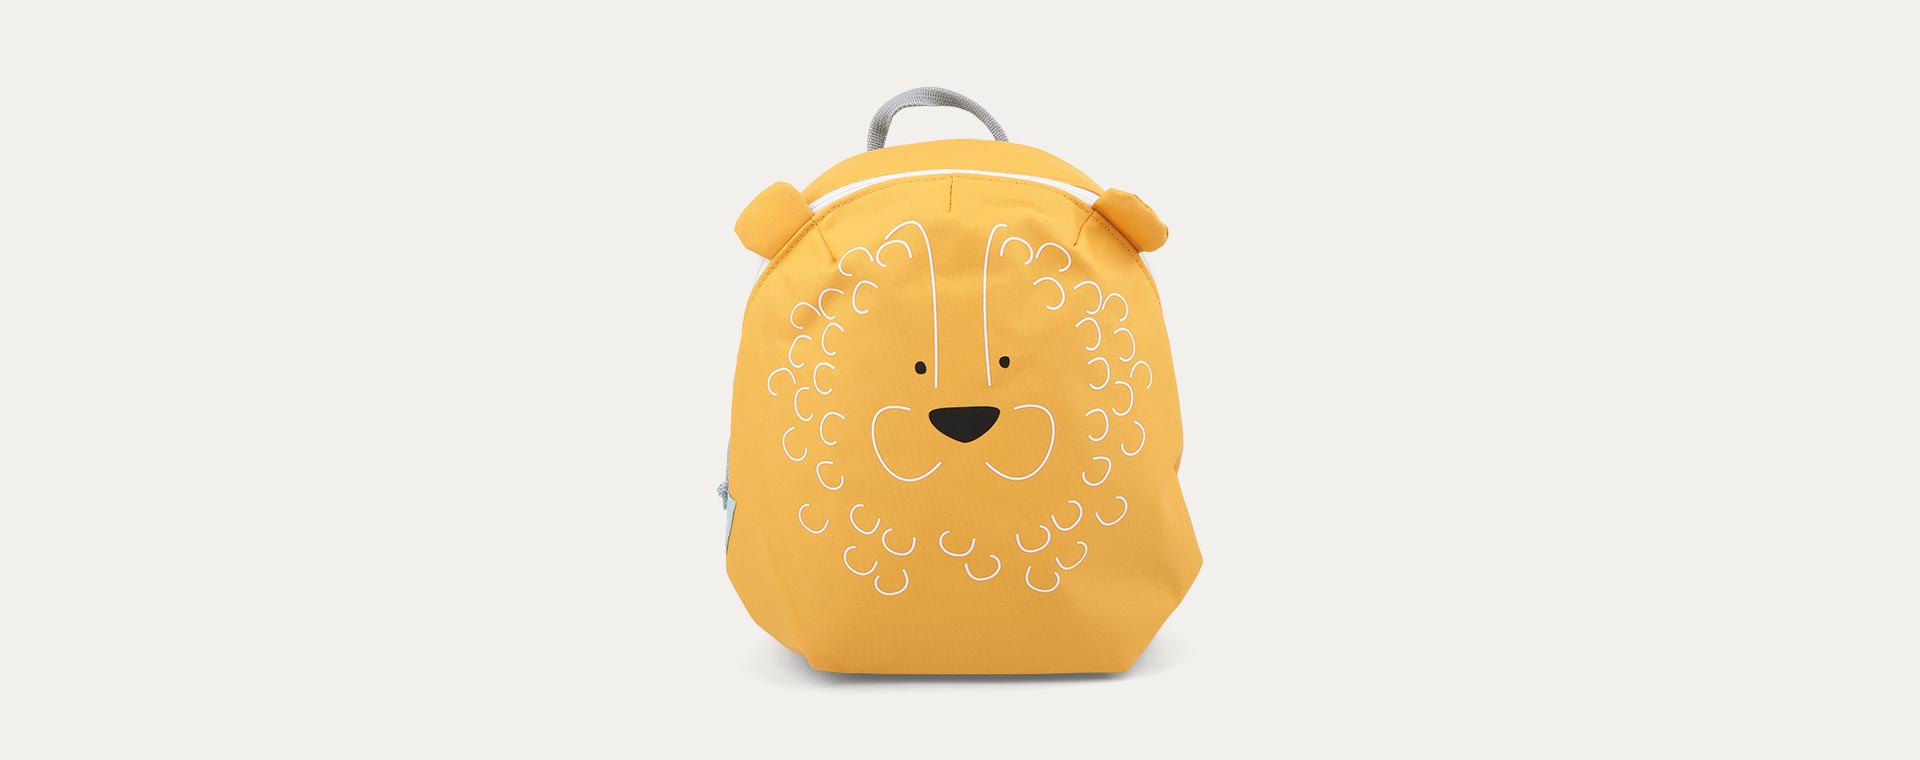 About Friends Lion Lassig Tiny Backpack About Friends